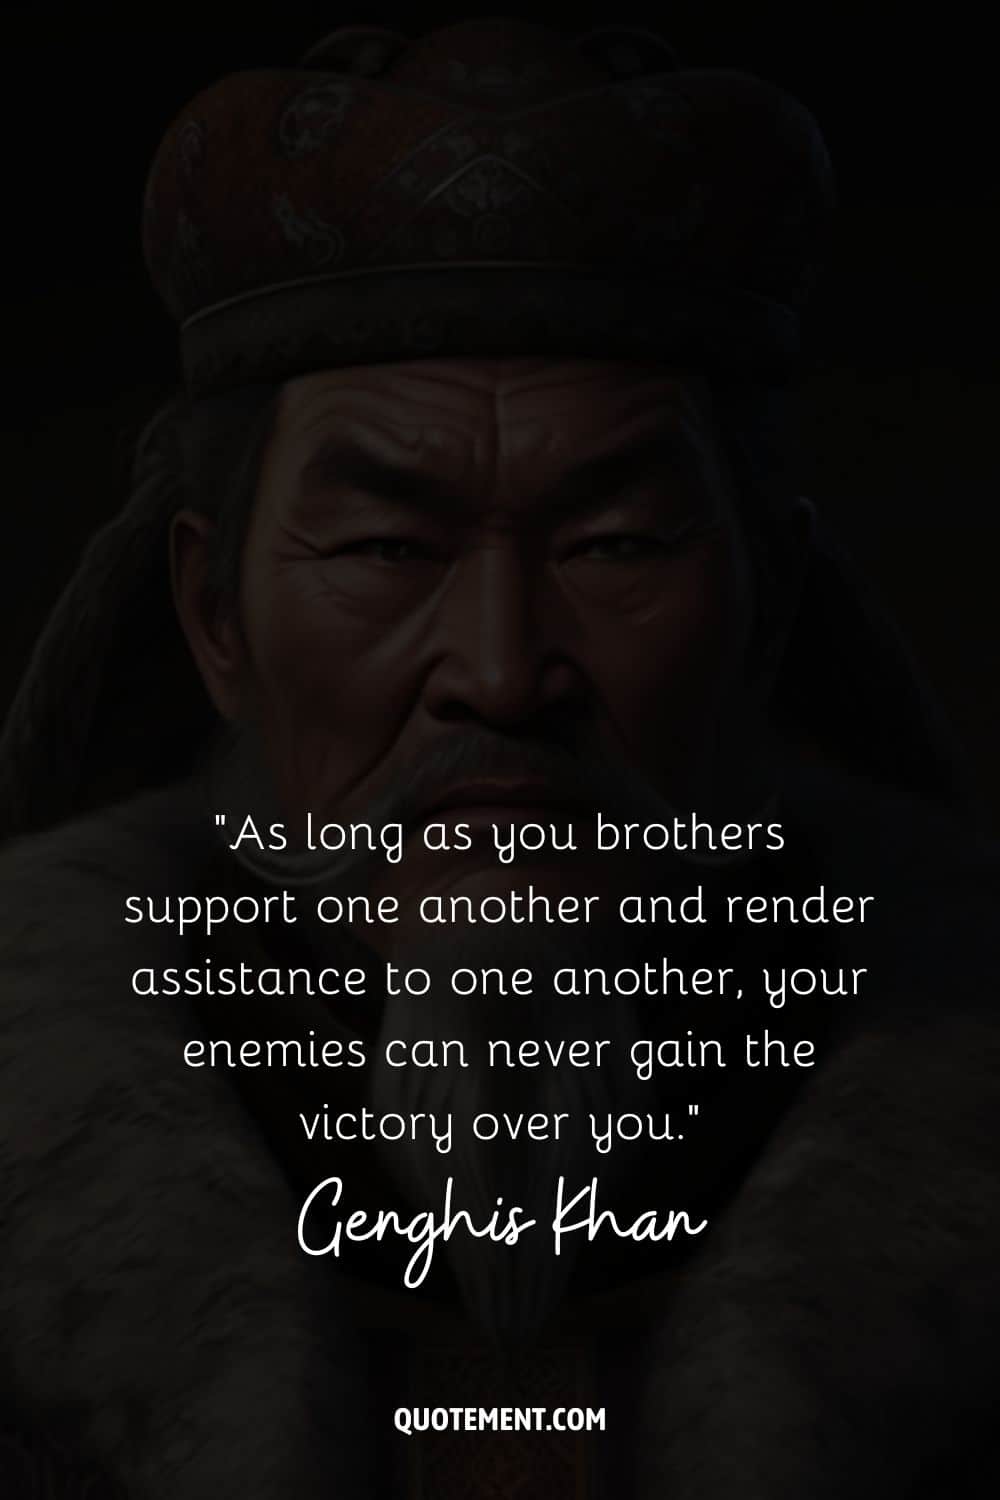 As long as you brothers support one another and render assistance to one another, your enemies can never gain the victory over you